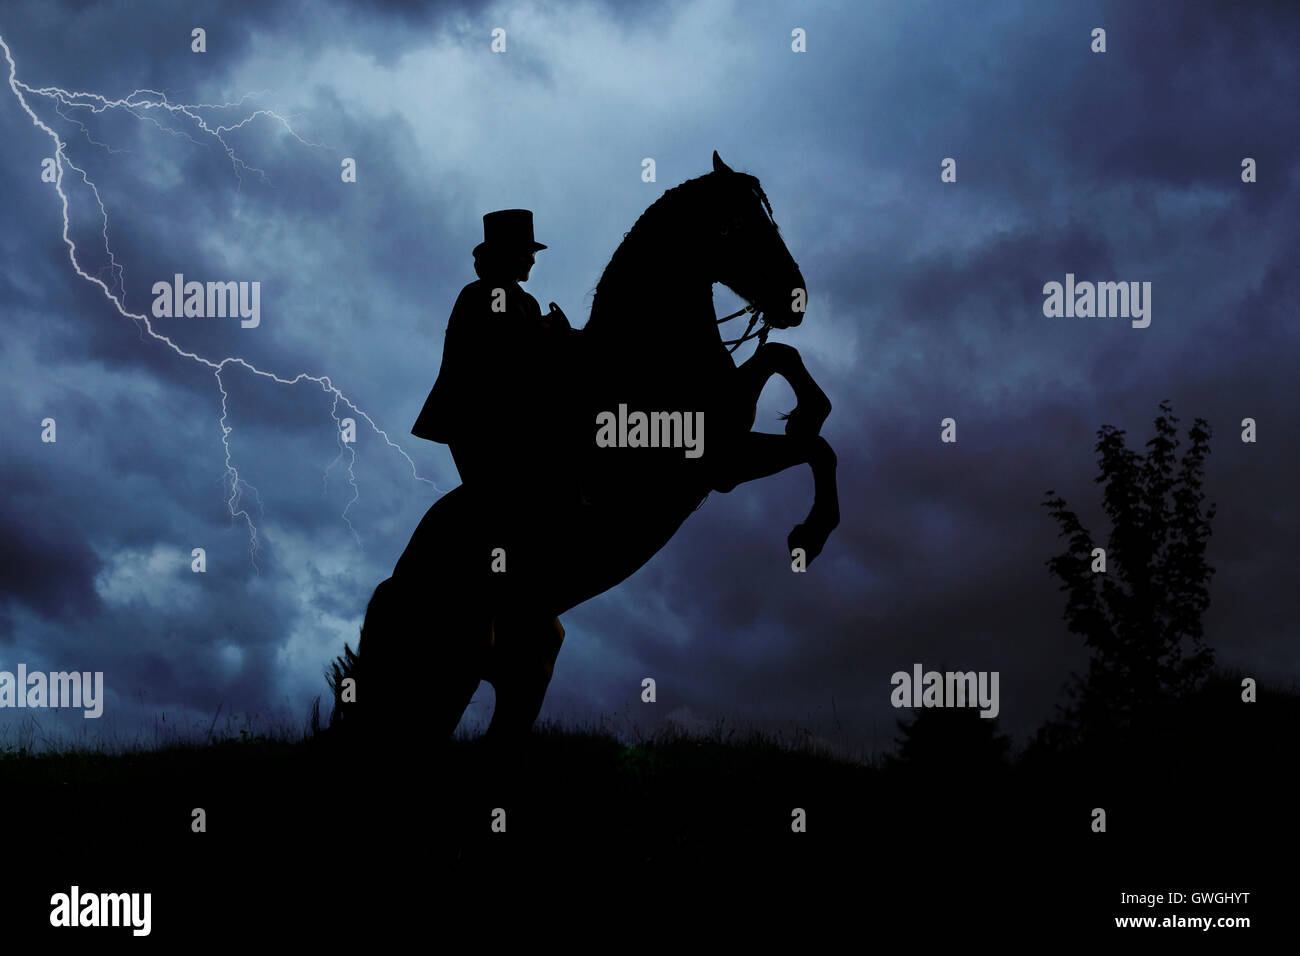 Freiberger Horse, Franches-Montagnes. Rider with costume and sidesaddle on a rearing horse, seen against a cloudy sky with thunderstorm. Switzerland Stock Photo